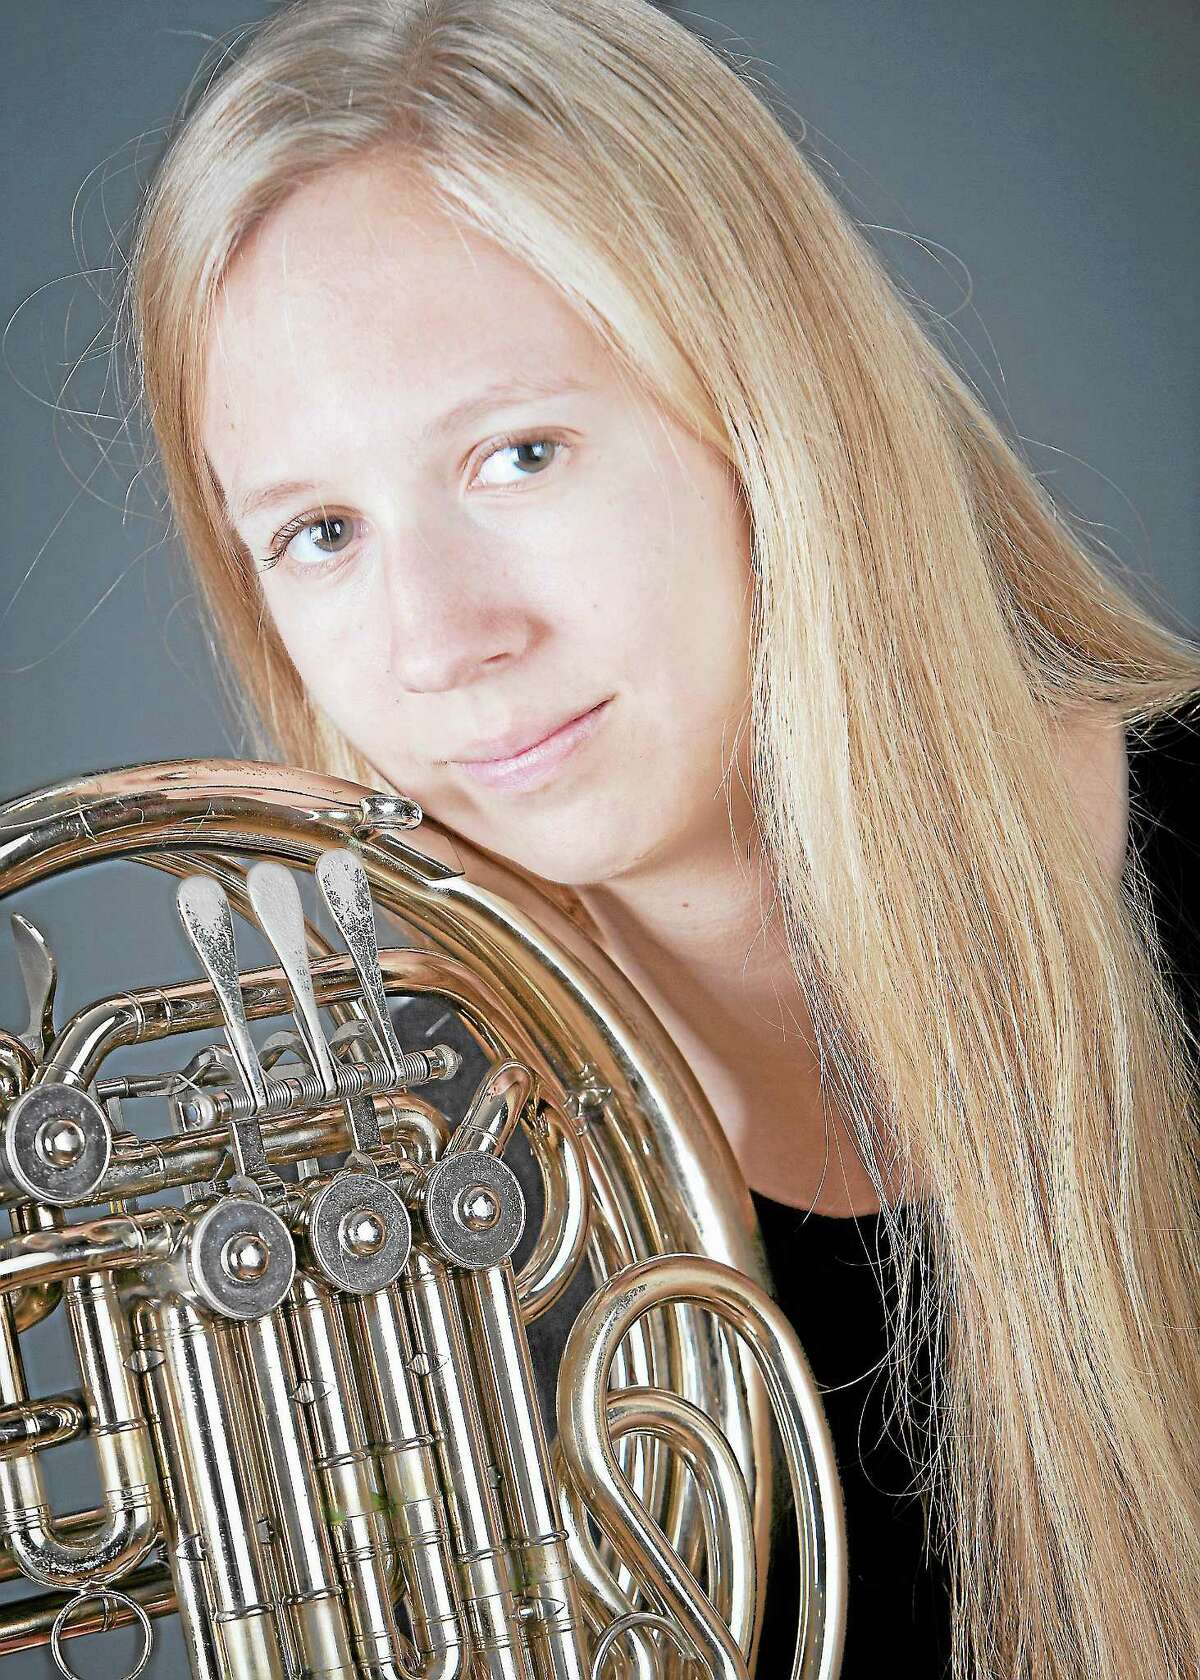 Eleanor Johnson will perform in the 2013 National Honors Ensembles at the Gaylord Opryland Hotel in Nashville on Oct. 30.